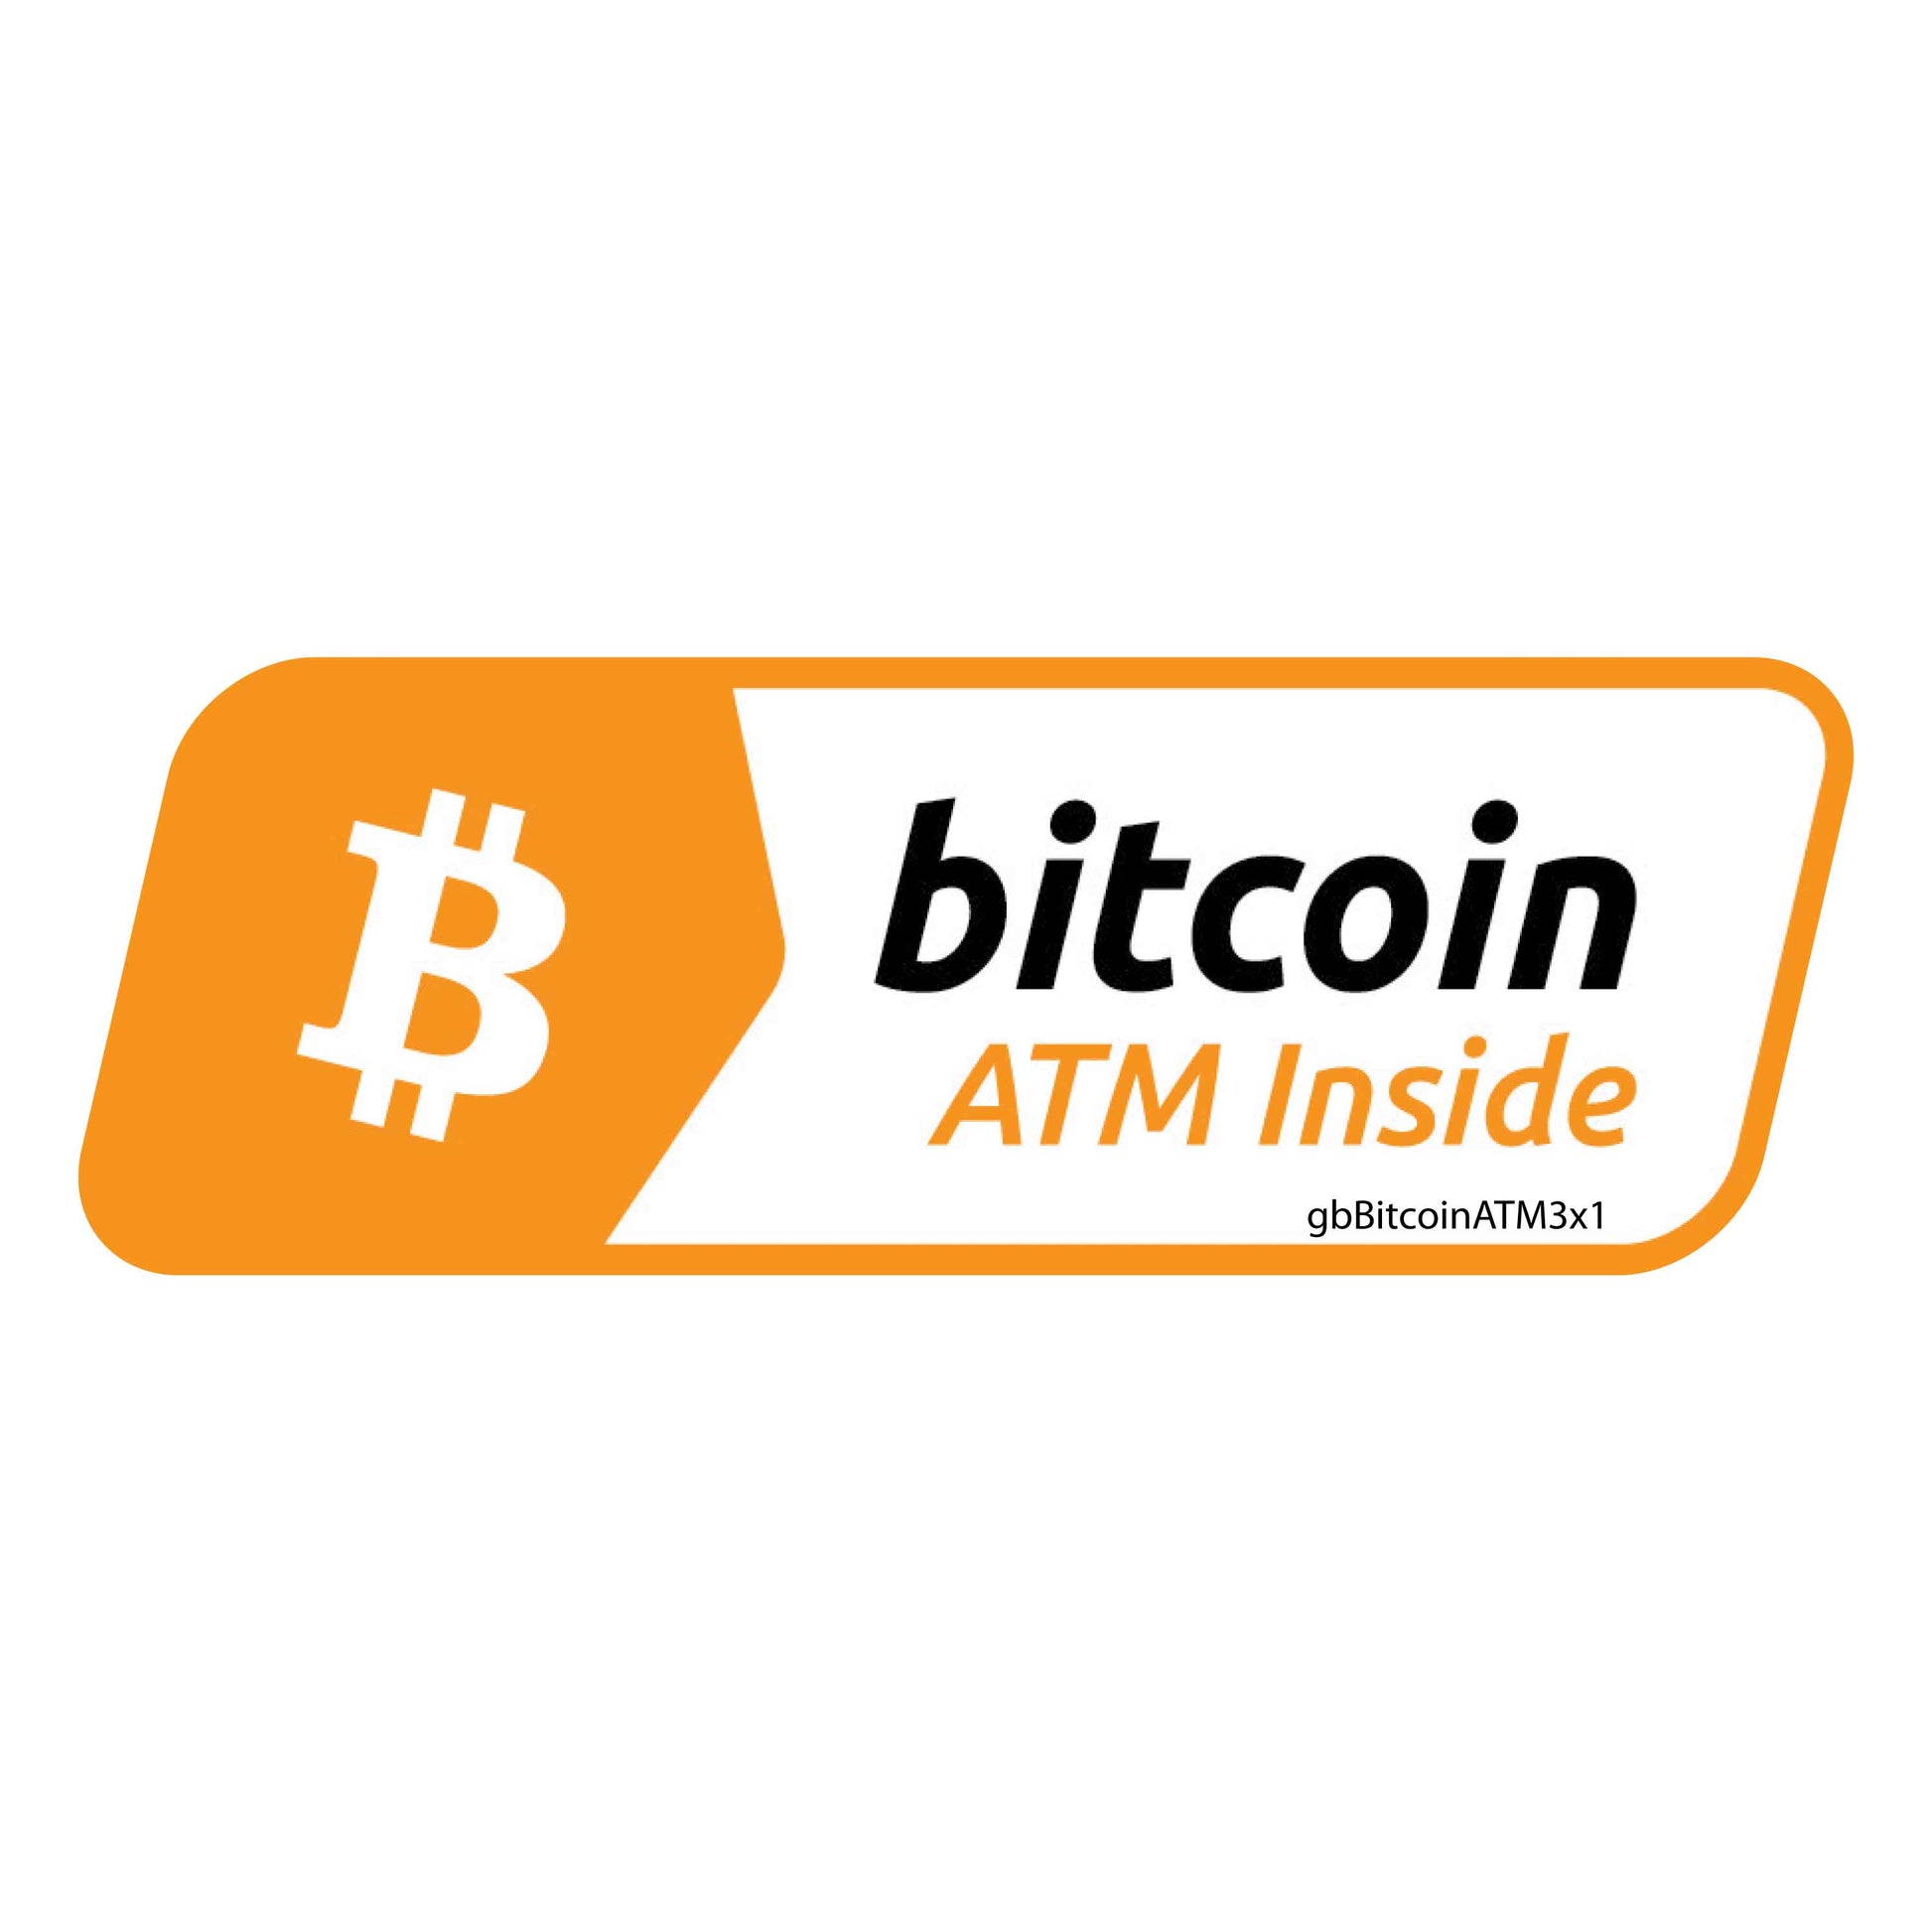 Bitcoin ATM Inside Decal. 3 inches by 1 inch in size.